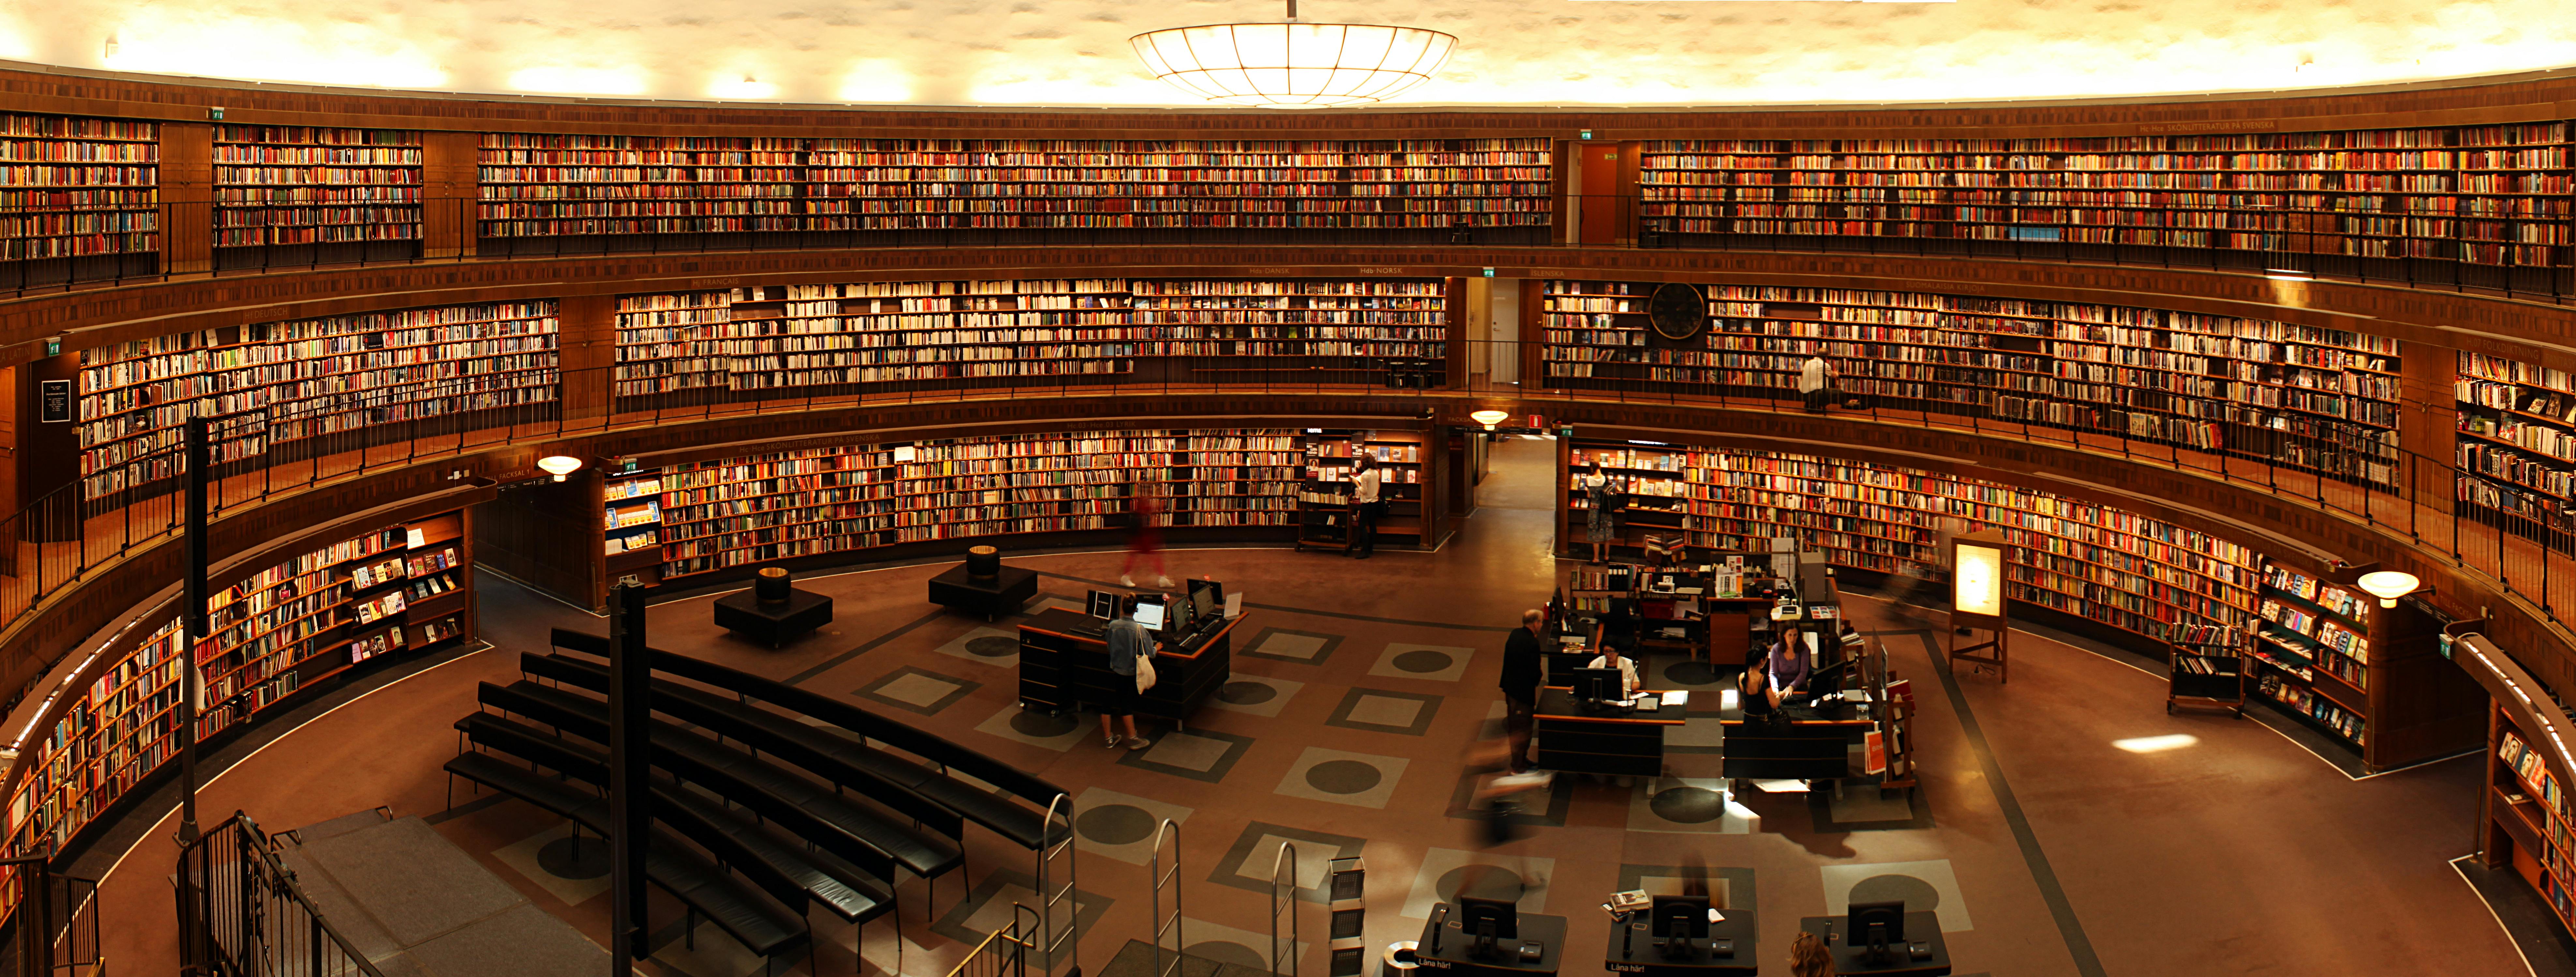 Photography Of Library Room · Free Stock Photo